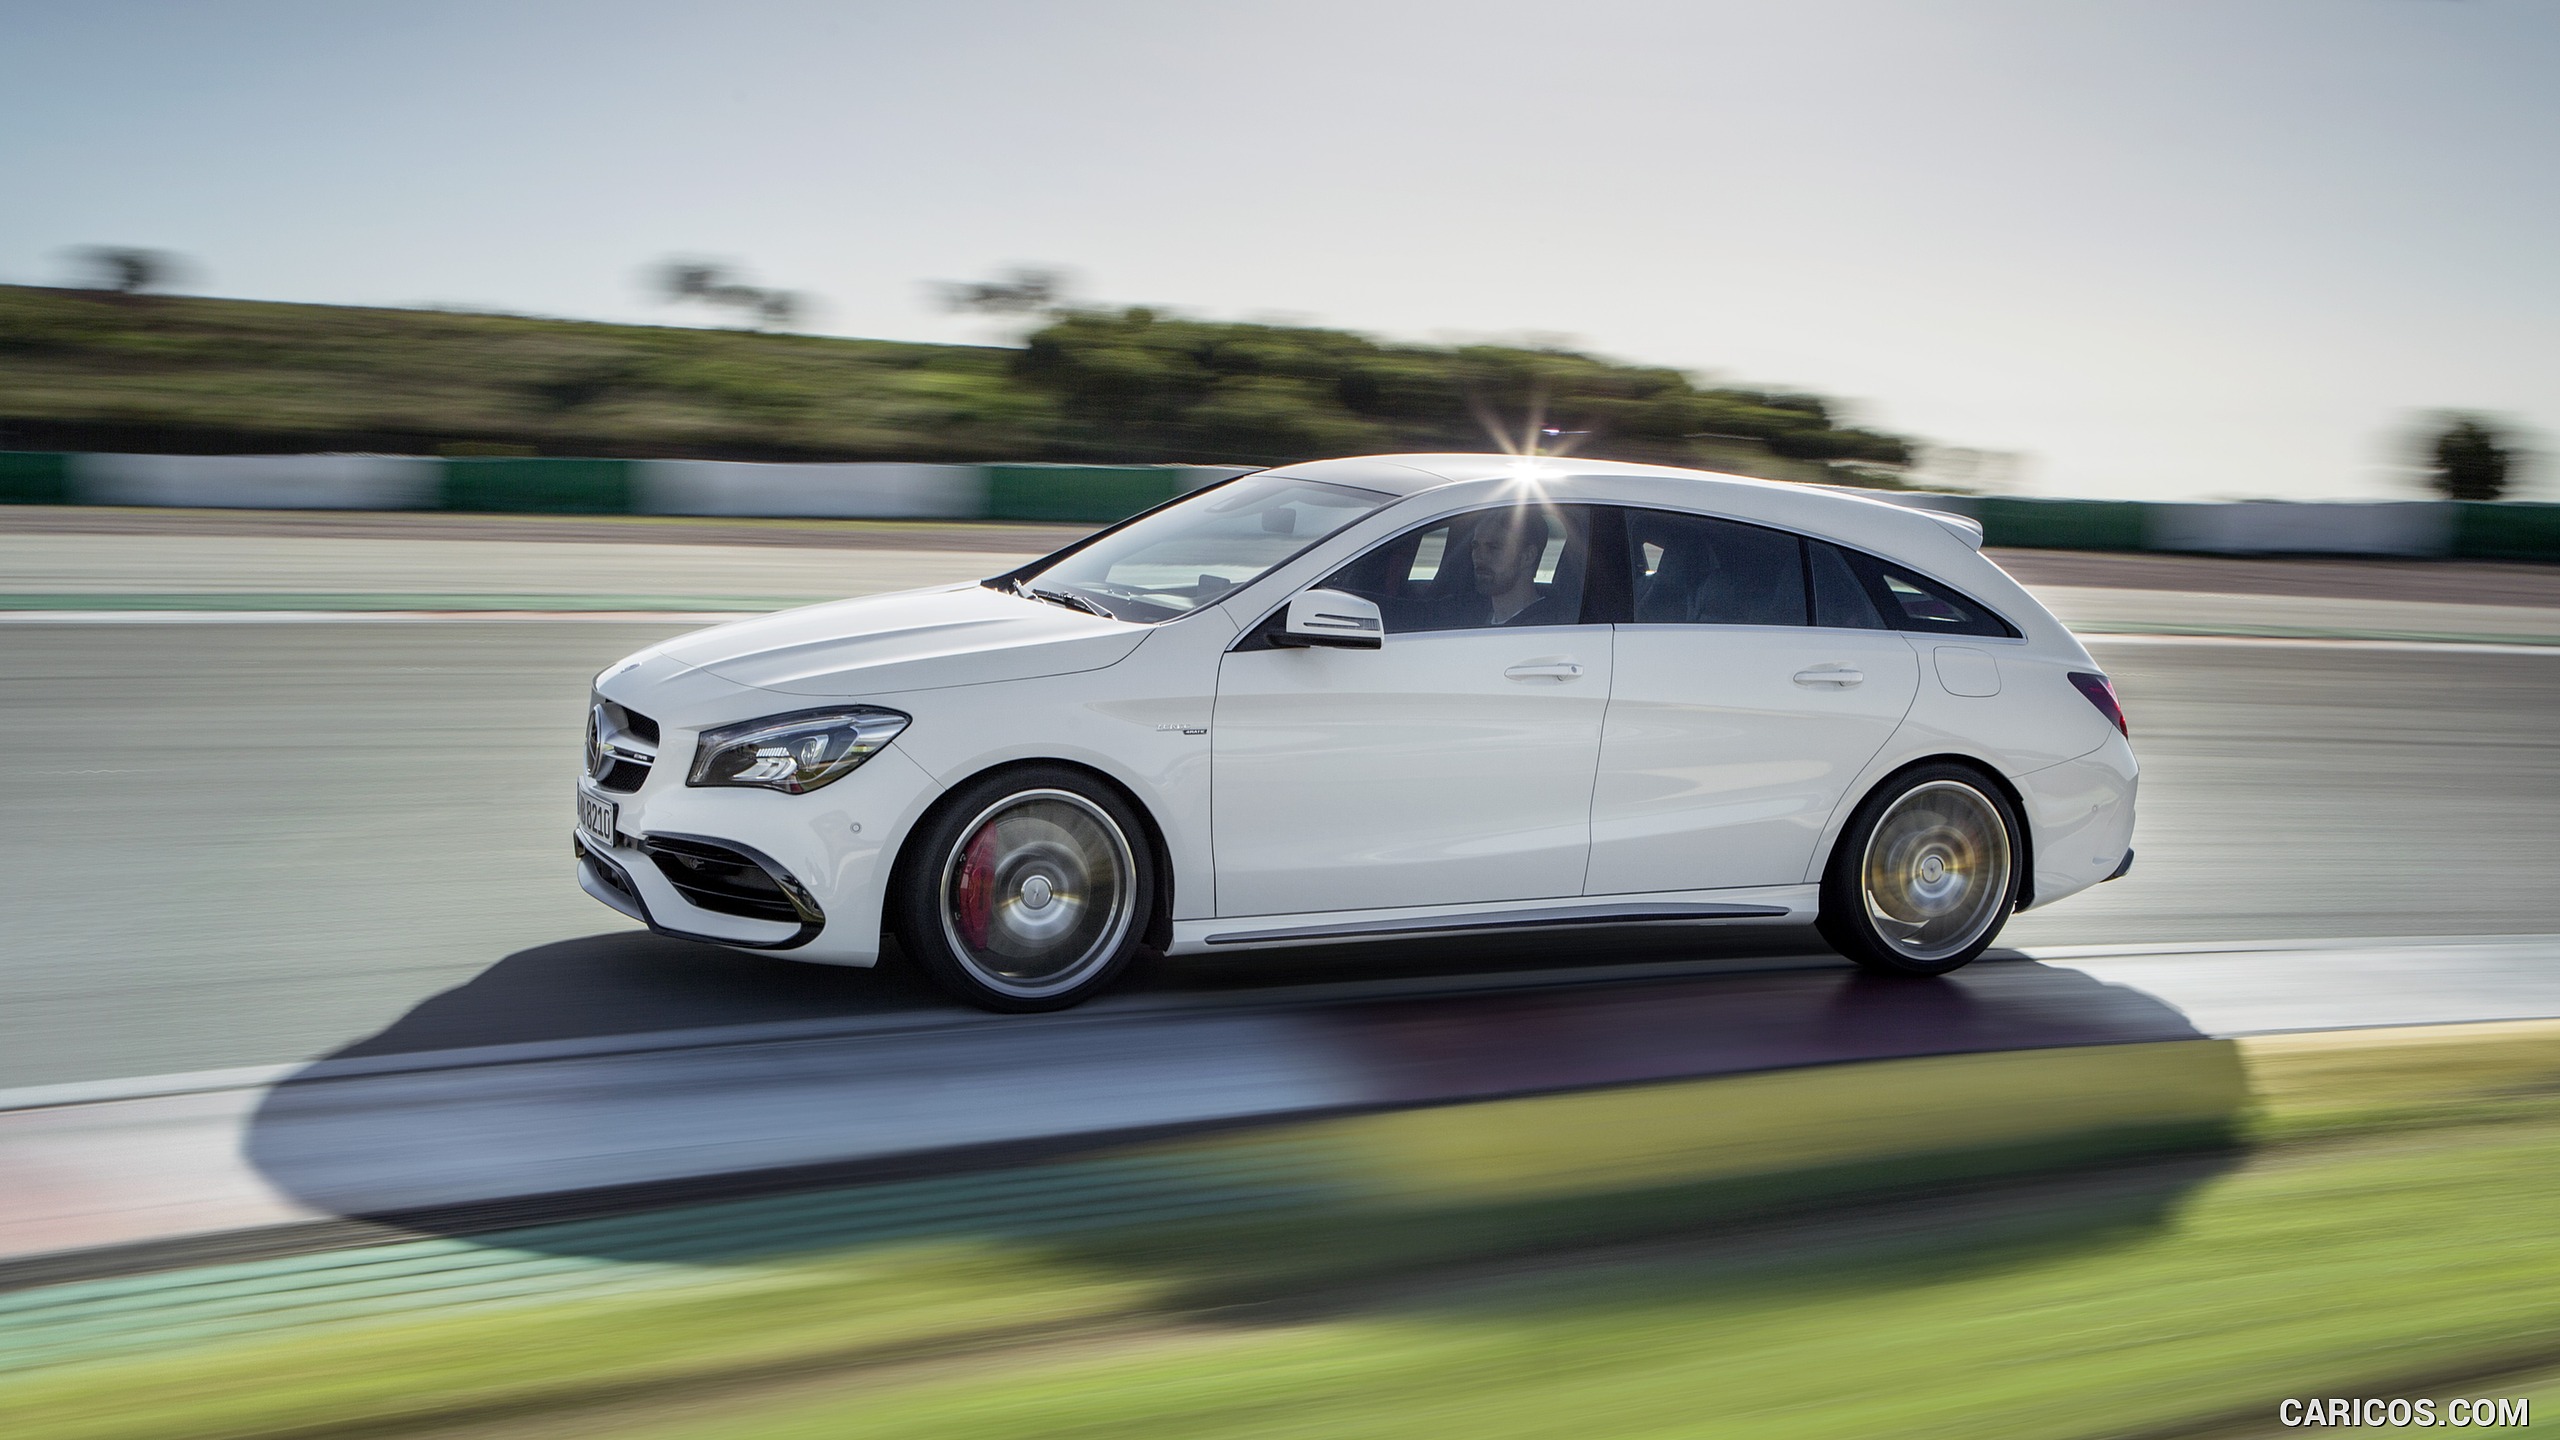 2017 Mercedes-AMG CLA 45 Shooting Brake (Chassis: X117, Color: Diamond White) - Side, #4 of 48